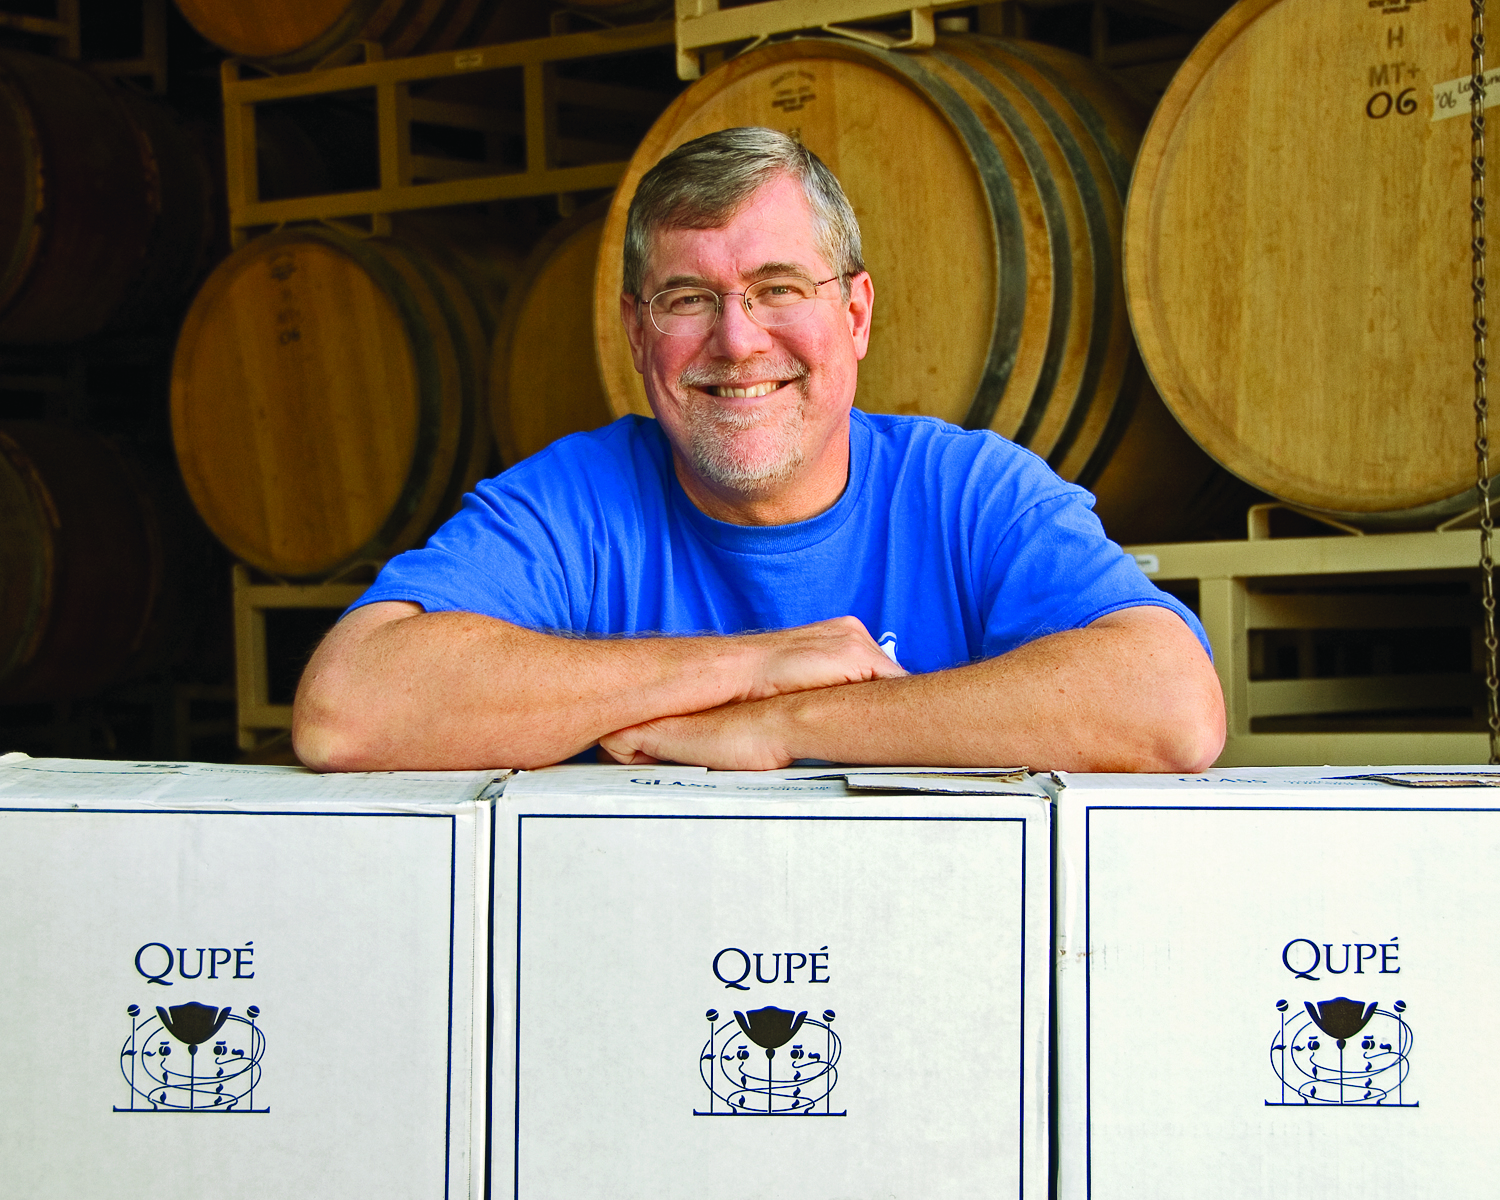 Central Coast winemaking pioneer, Bob Lindquist of Qupe